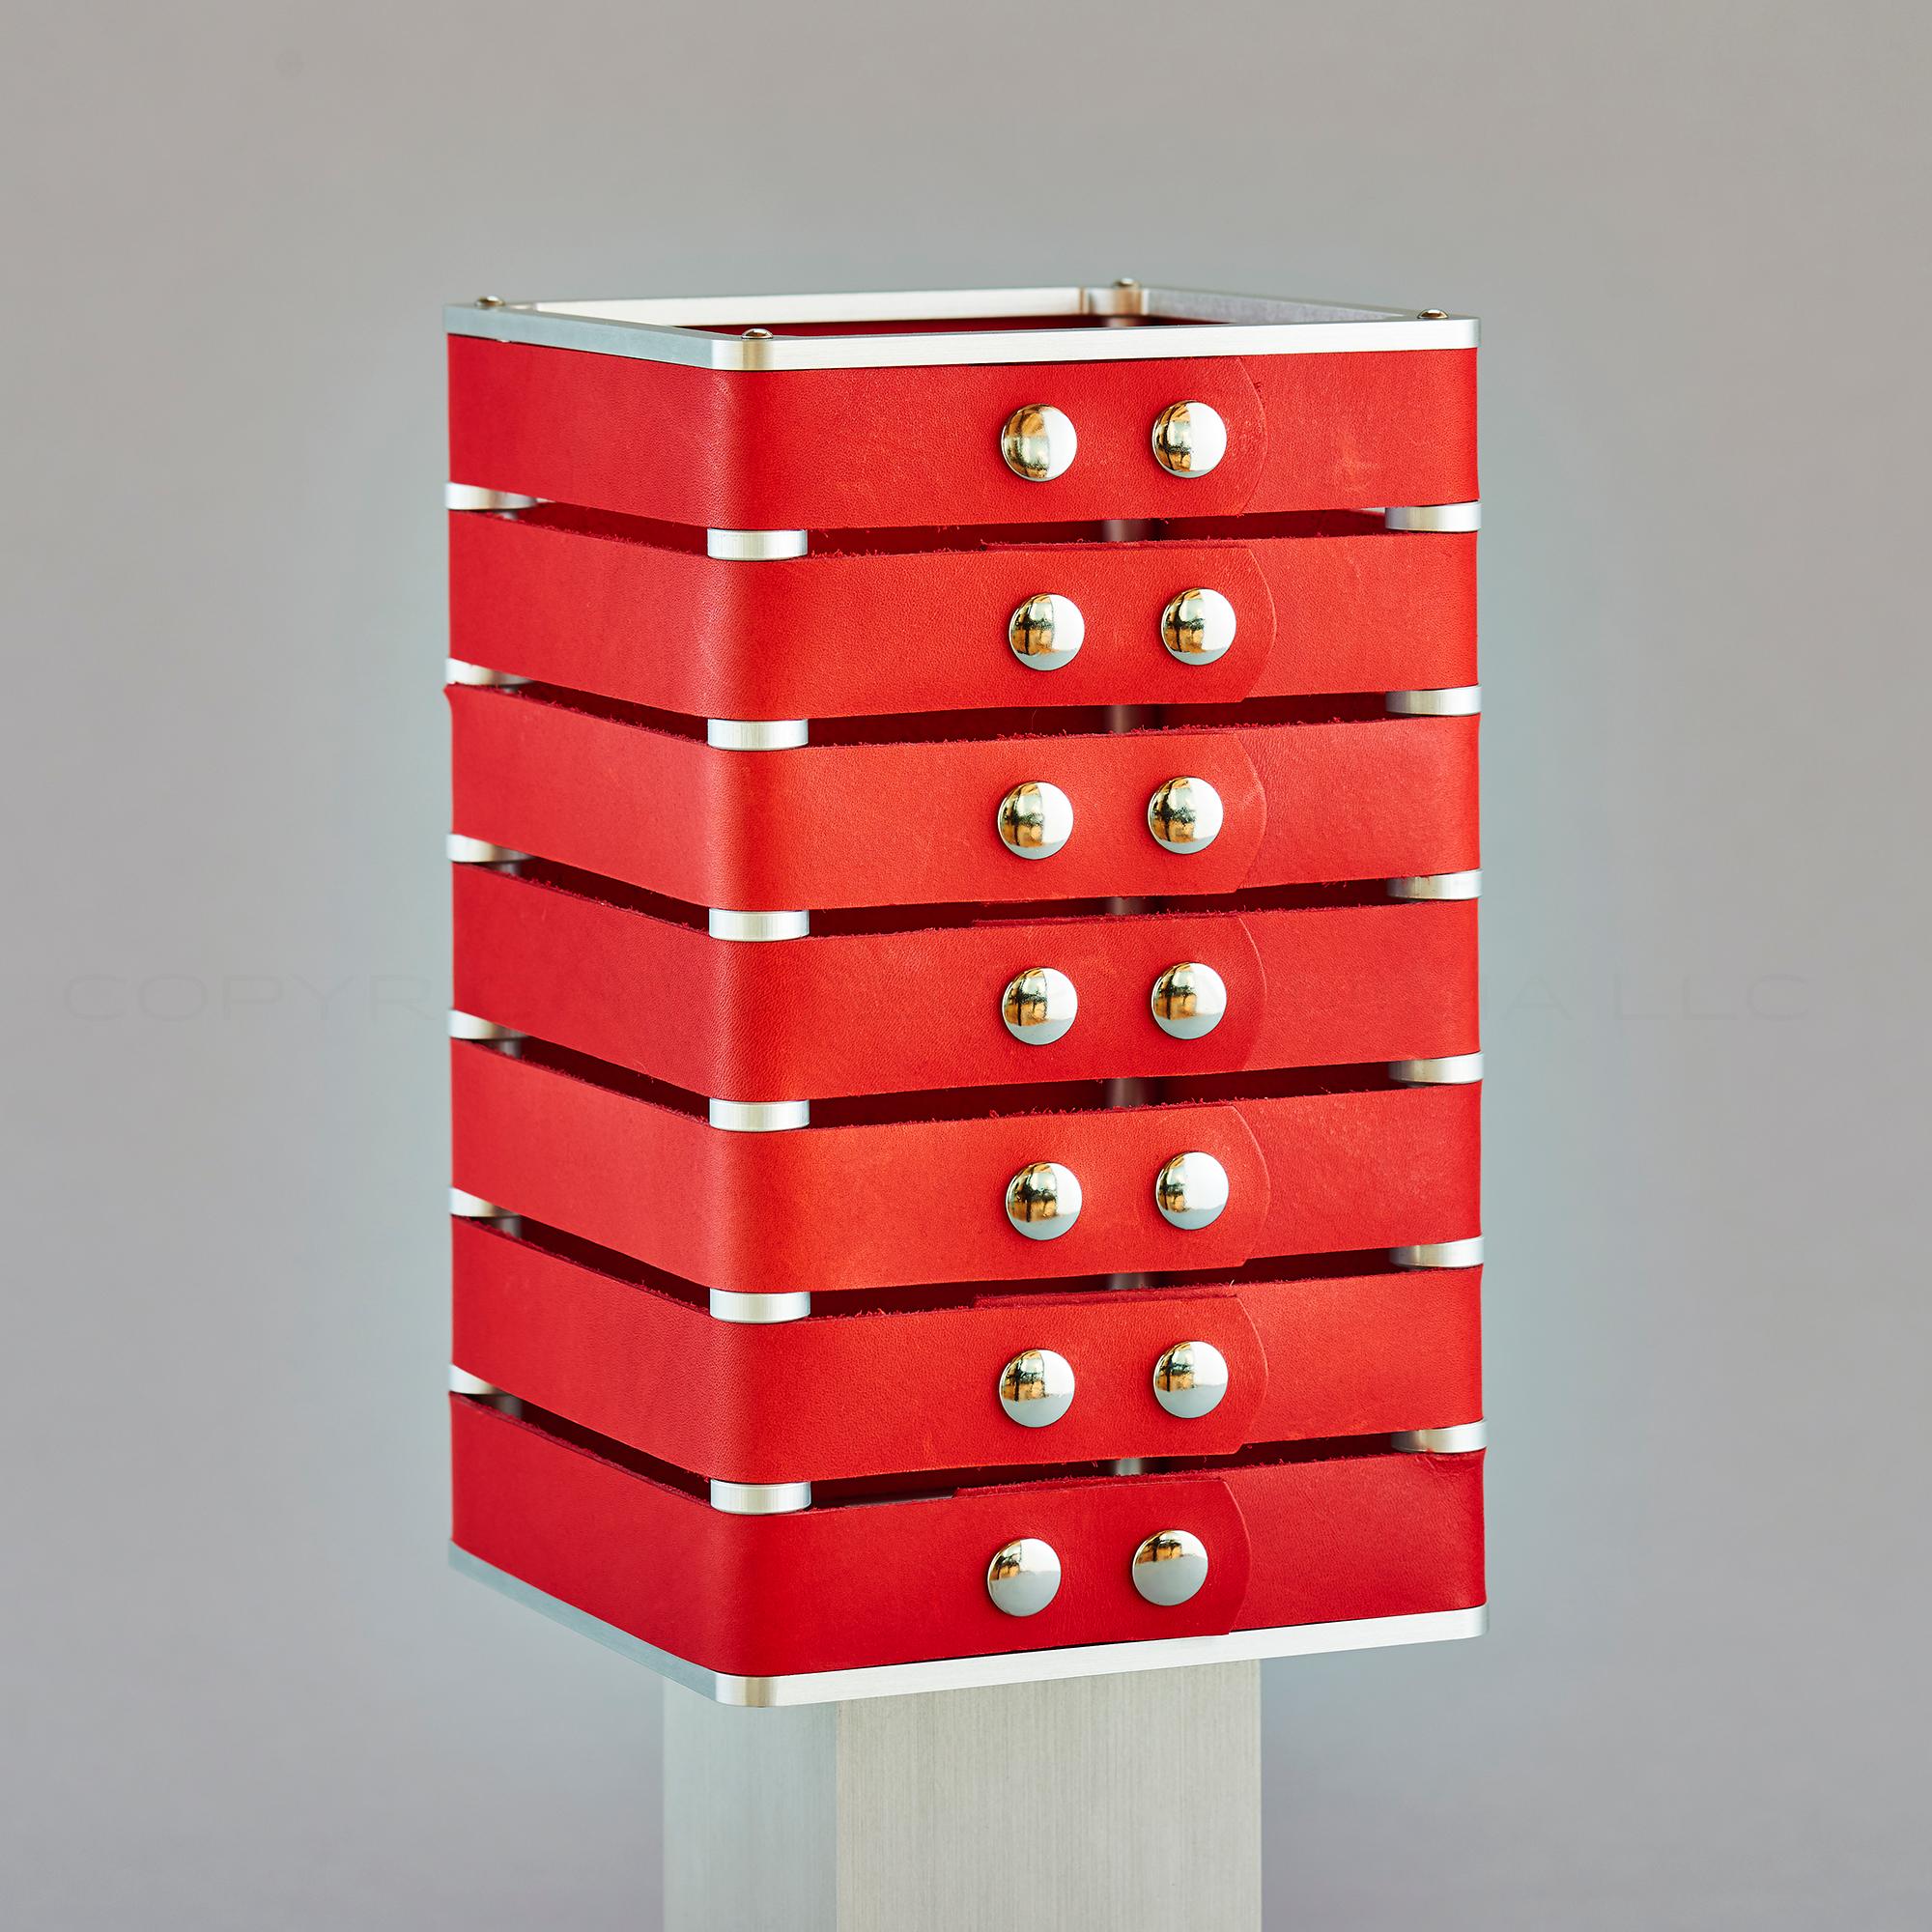 Contemporary Modern, Minimal, Solid Metal Table Light in M. Fiesta Red Italian Leather